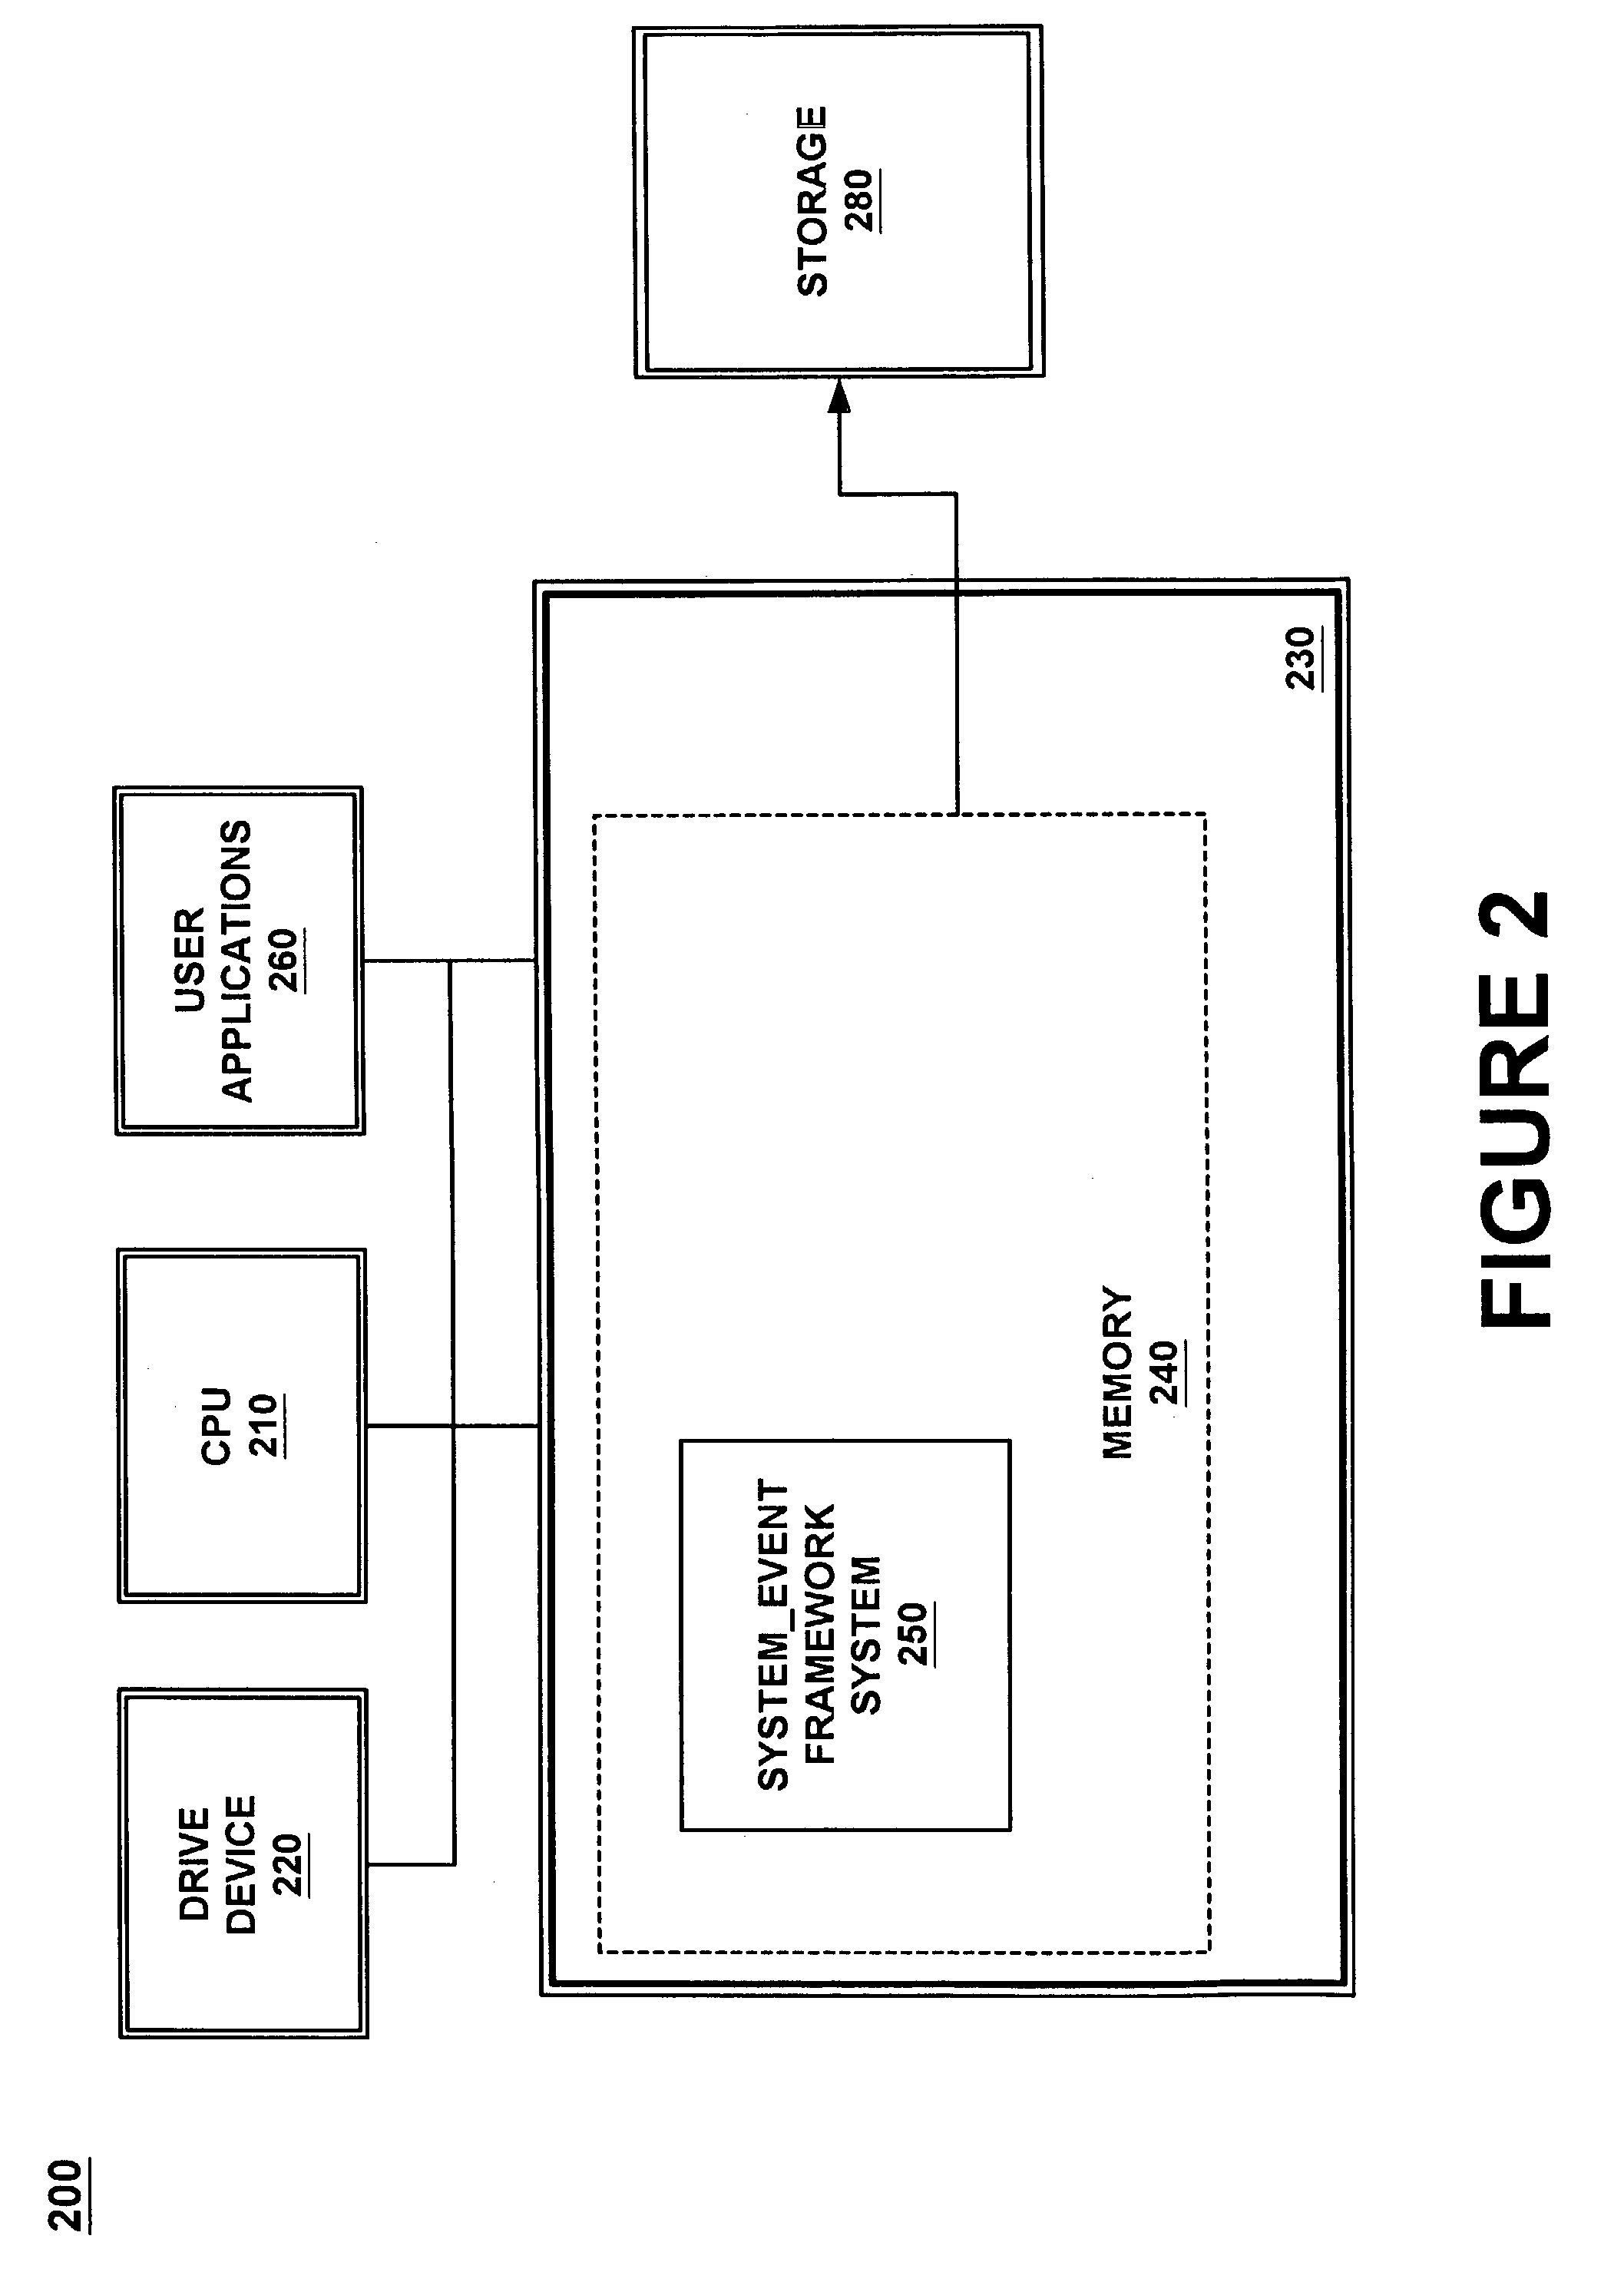 Kernel event subscription and publication system and method